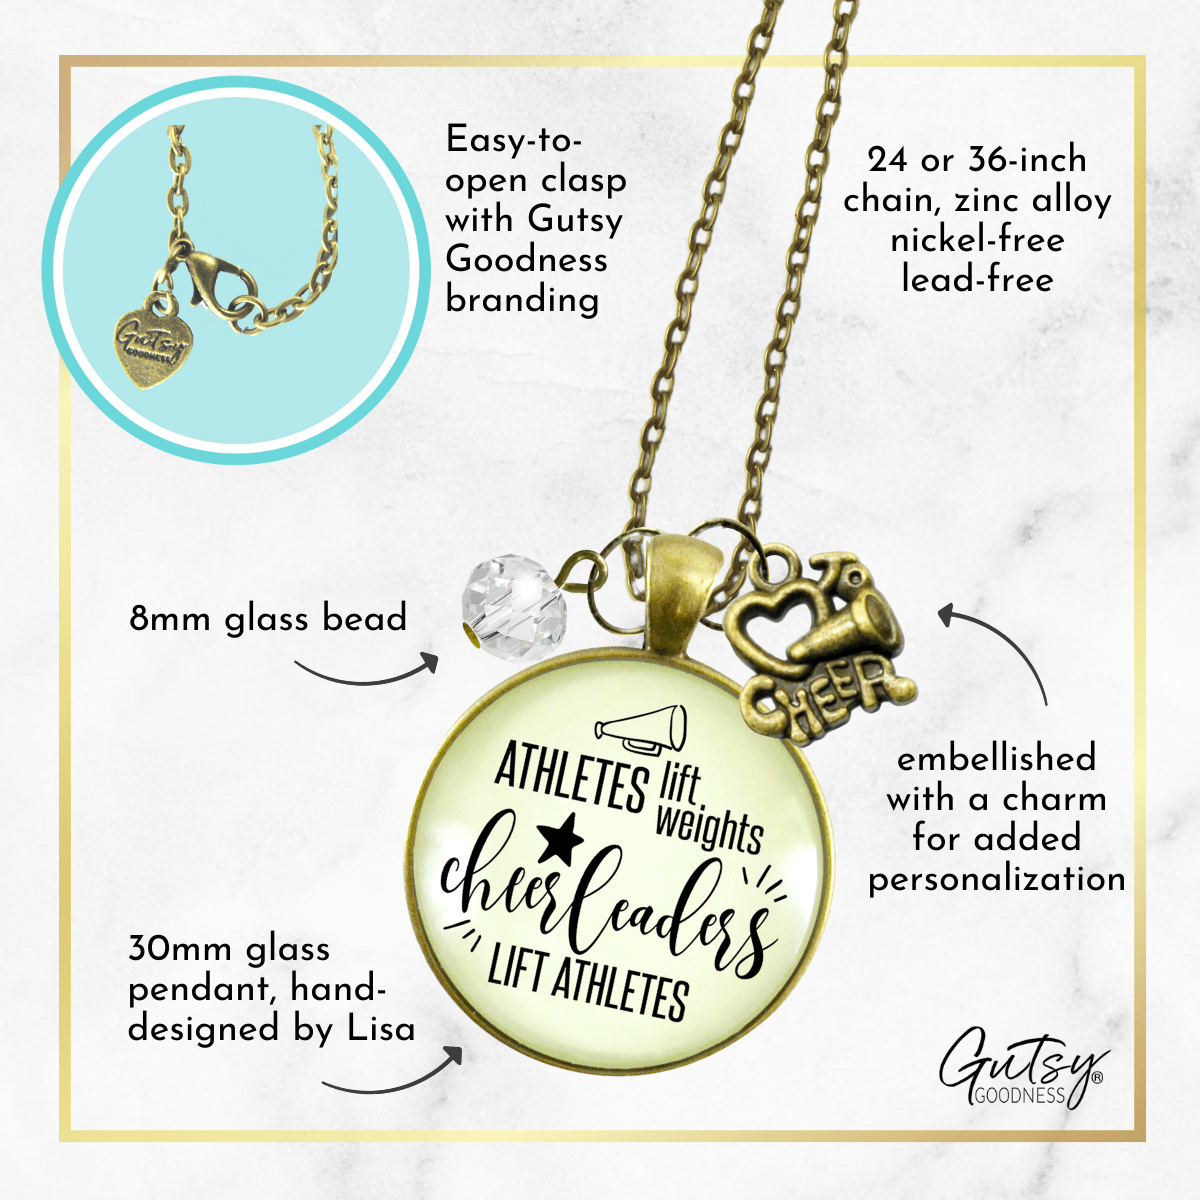 Cheer Necklace Athletes Lift Weights Funny Cheerleader Jewelry Megaphone Charm - Gutsy Goodness